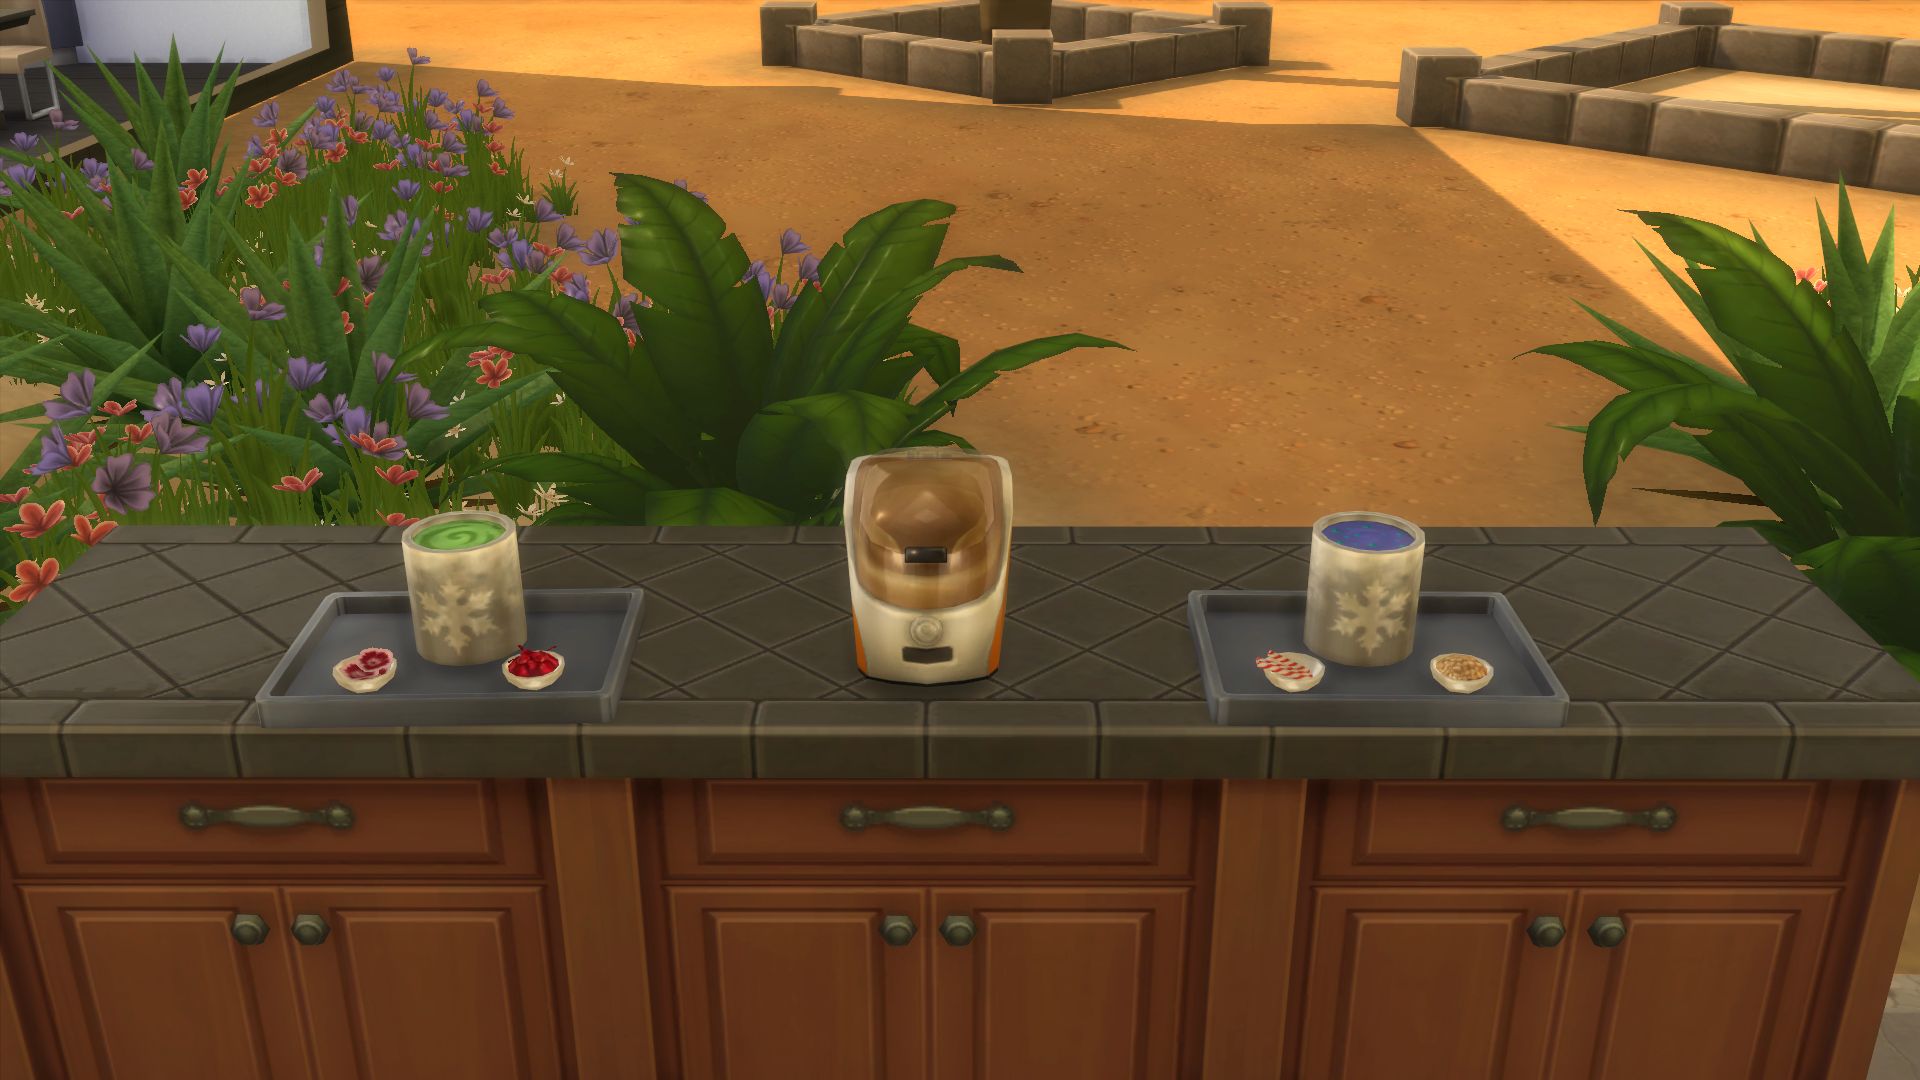 The Sims 4 : Review/Overview  Cool Kitchen Stuff // Part 1 - CAS & New  Objects! 